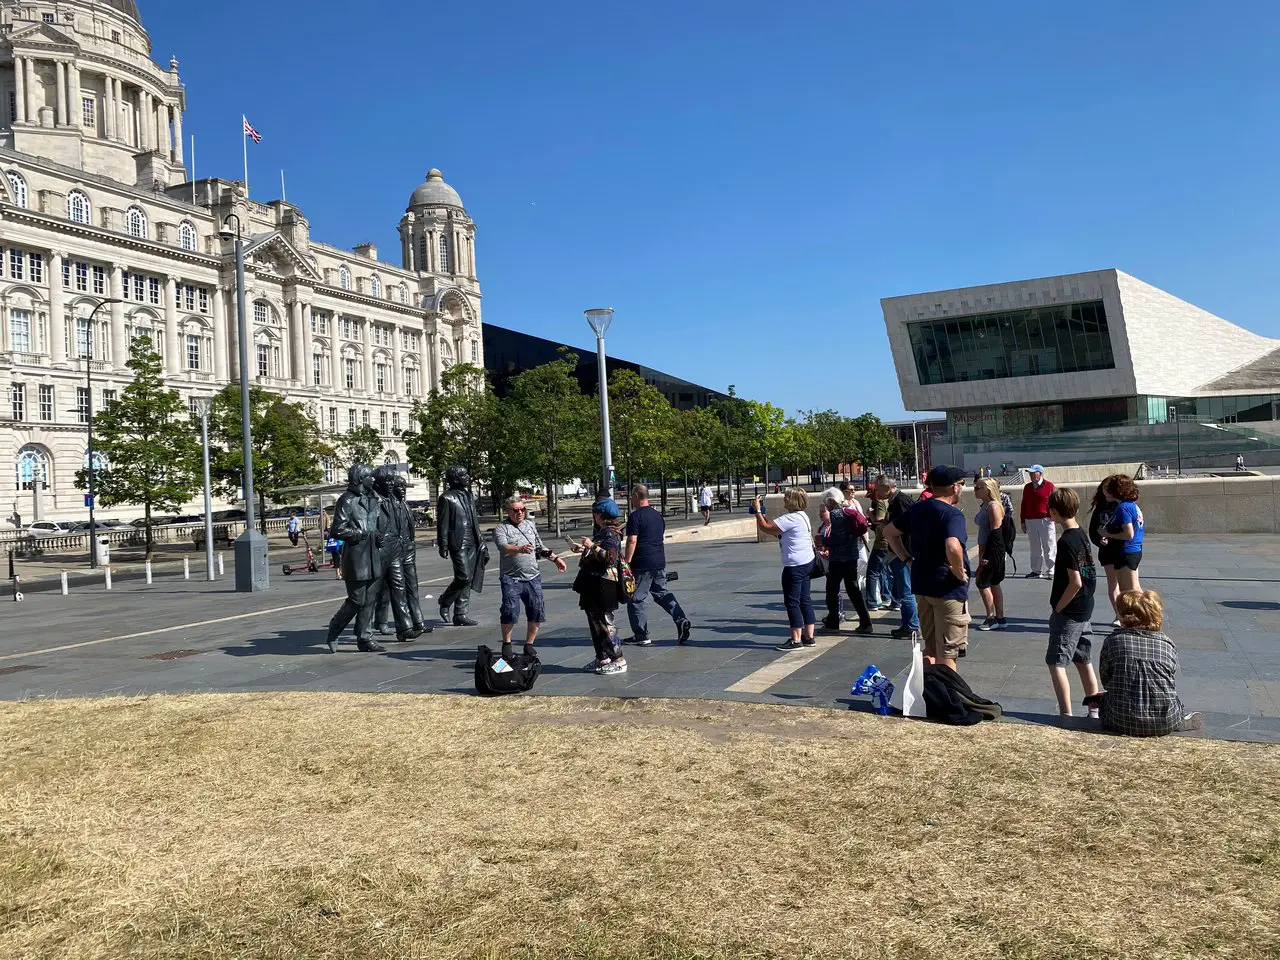 Tourist crowds at Beatles Statue Liverpool on a sunny day